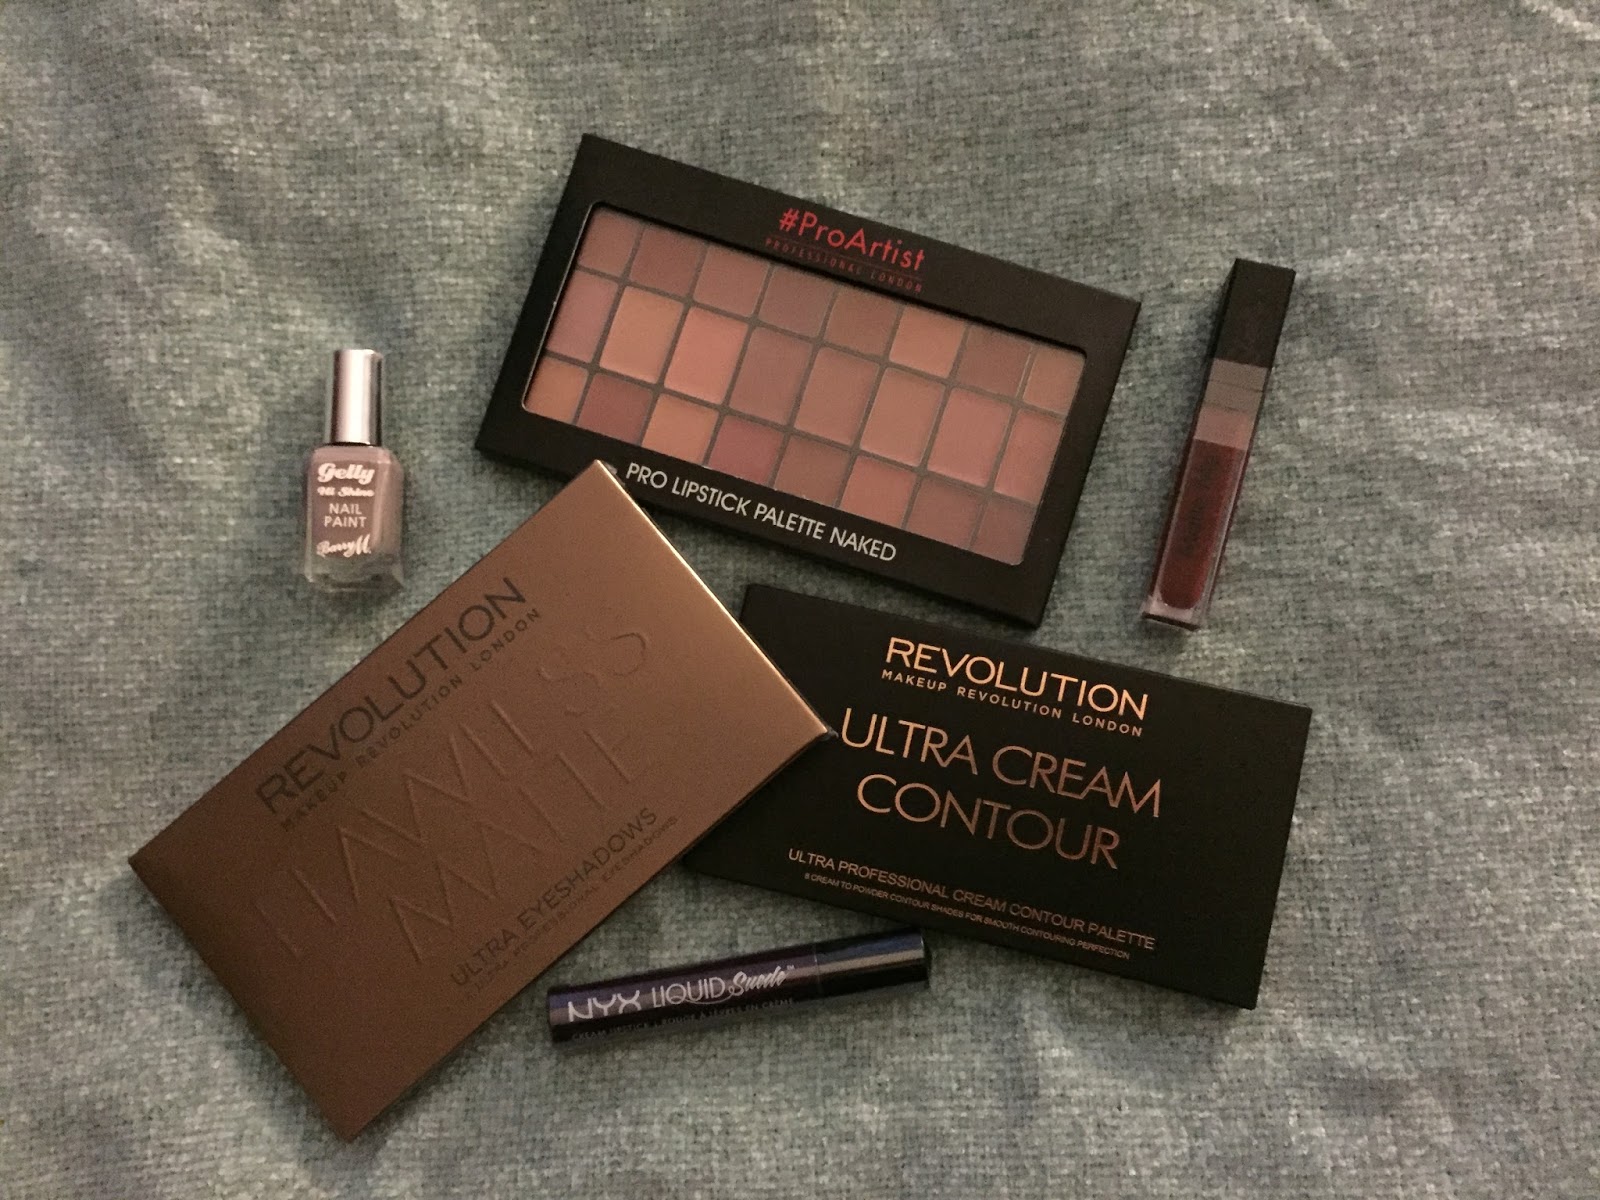 Make Up Revloution Flawless Mattes Palette Review and Swatches